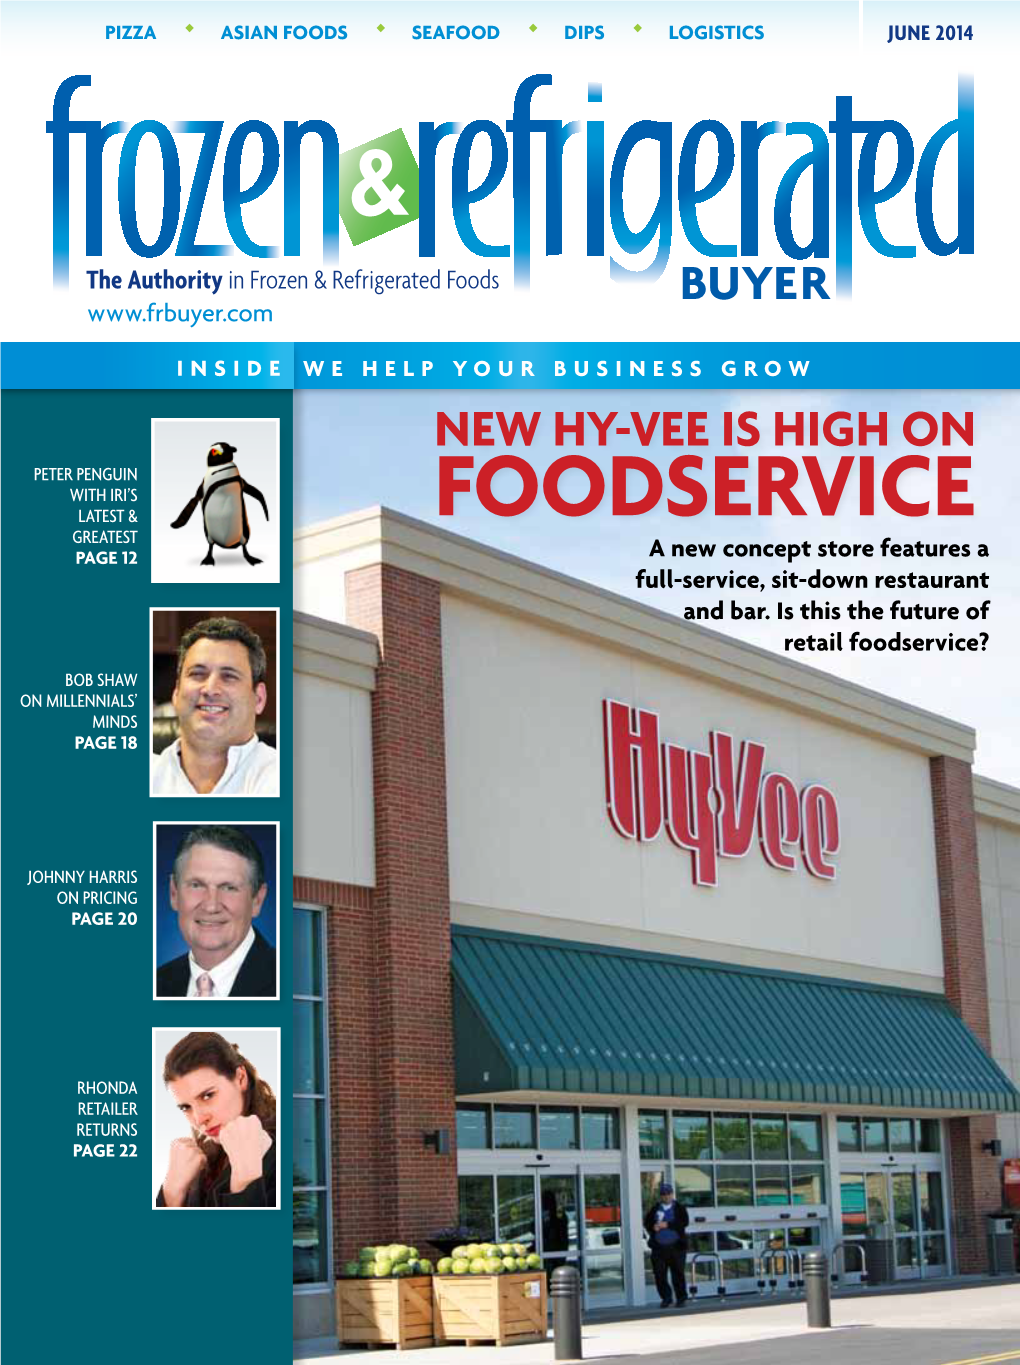 FOODSERVICE GREATEST PAGE 12 a New Concept Store Features a Full-Service, Sit-Down Restaurant and Bar